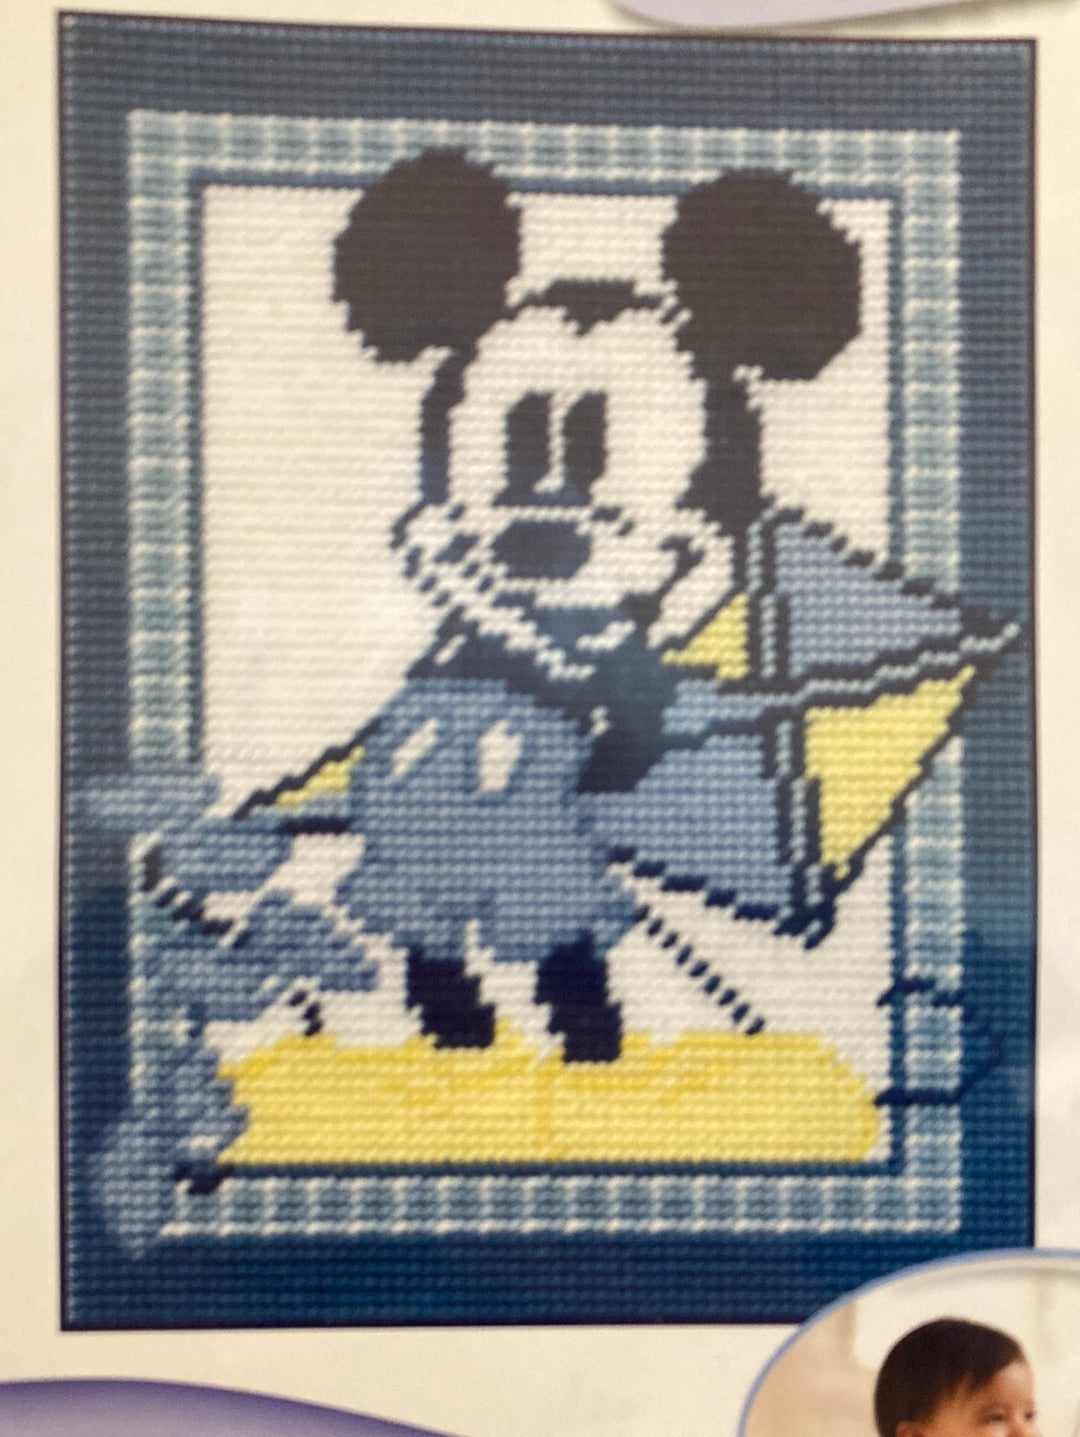 DMC Disney Baby: Mickey and his kite tapestry kit for older kids or adults. 11ct double printed canvas, needle, threads. Size 15cm x 20cm